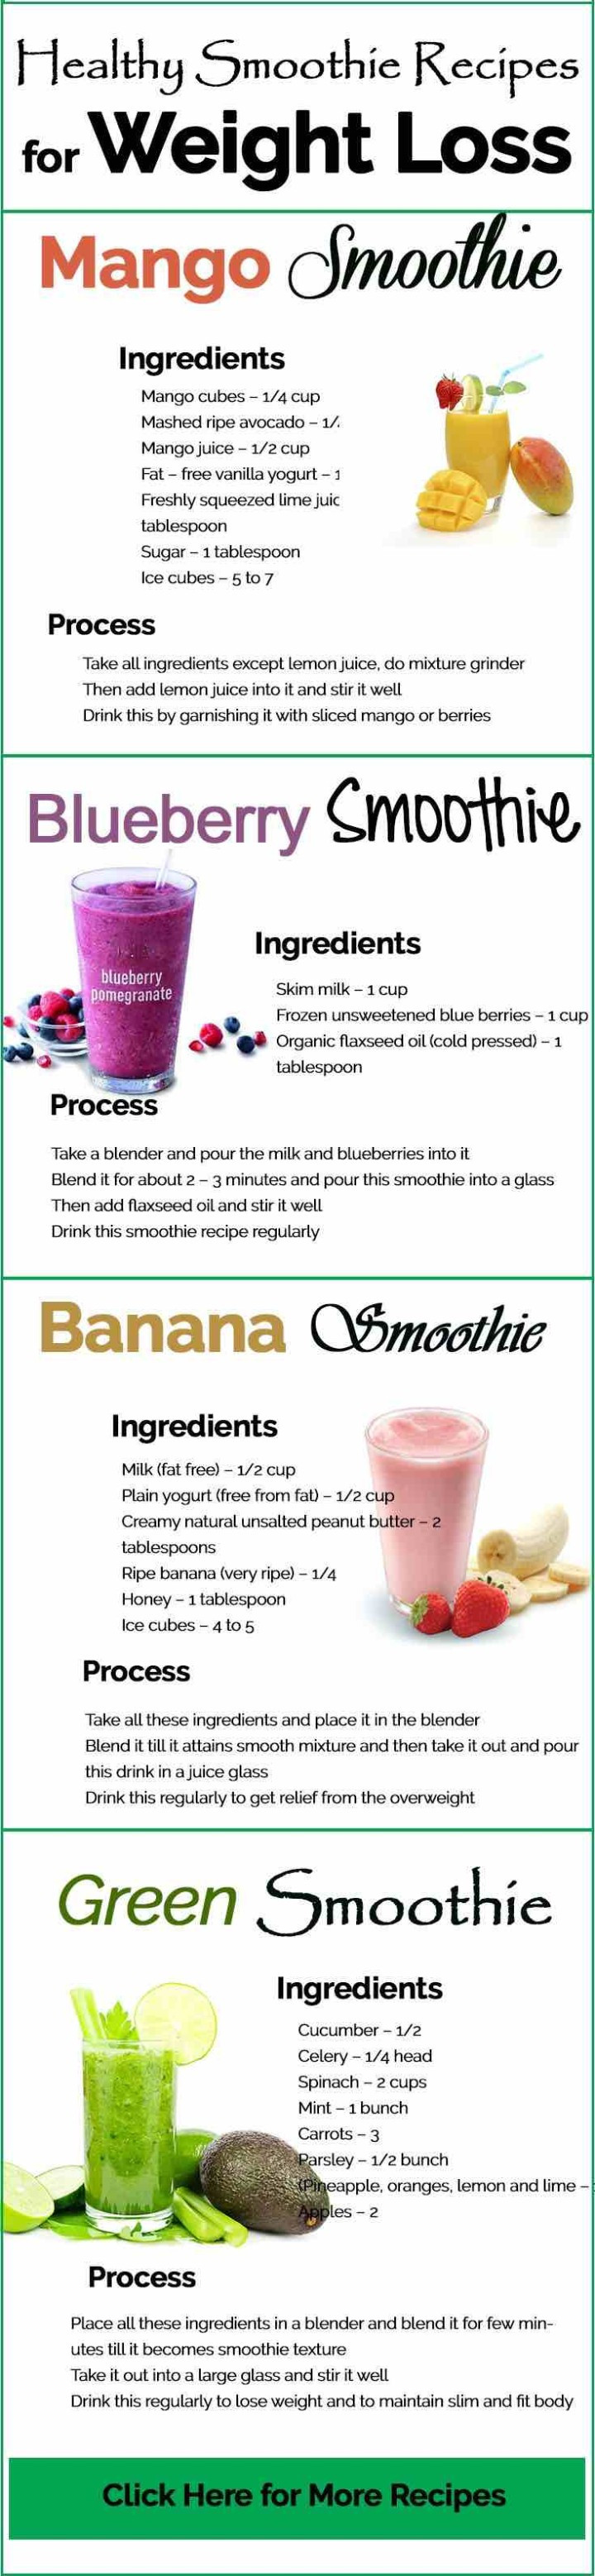 Healthiest Smoothies For Weight Loss
 Juicing Recipes for Detoxing and Weight Loss MODwedding